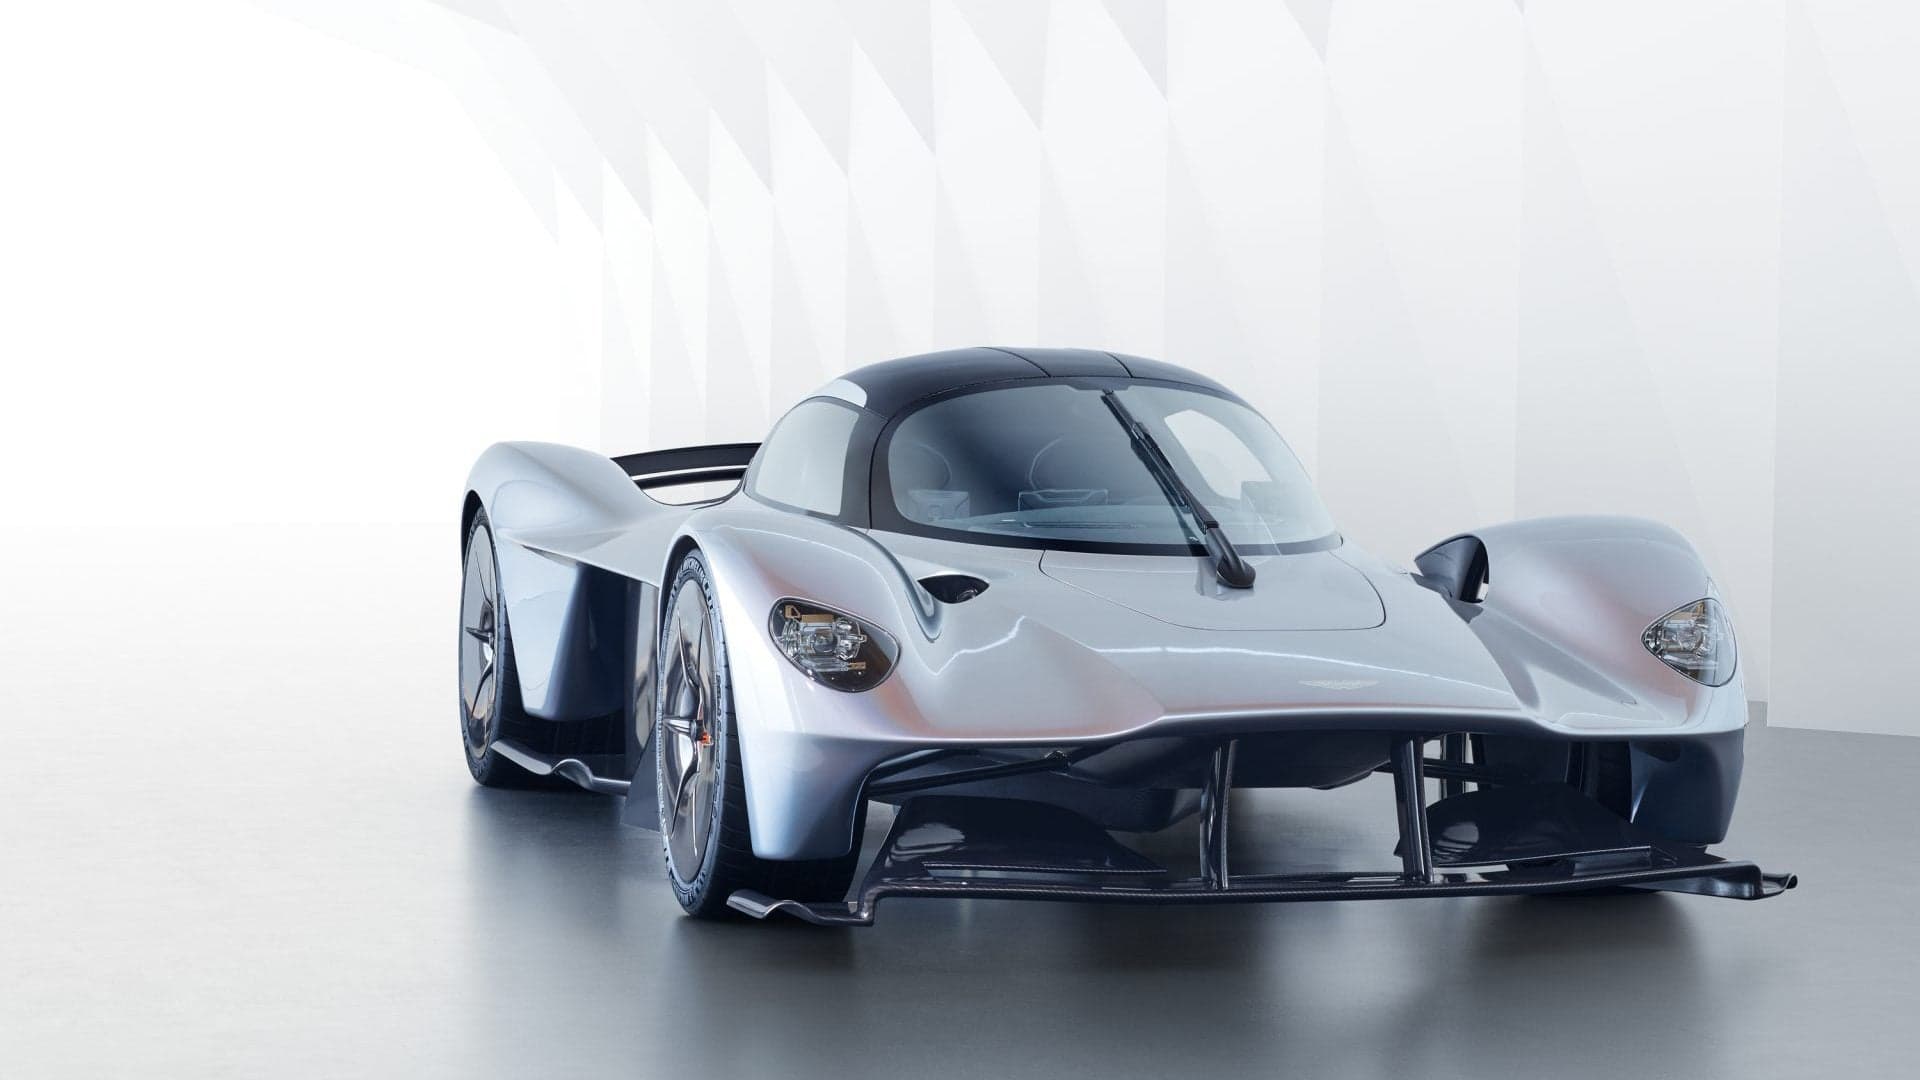 A Scalper Is Selling an Aston Martin Valkyrie Build Slot for an Undisclosed Price